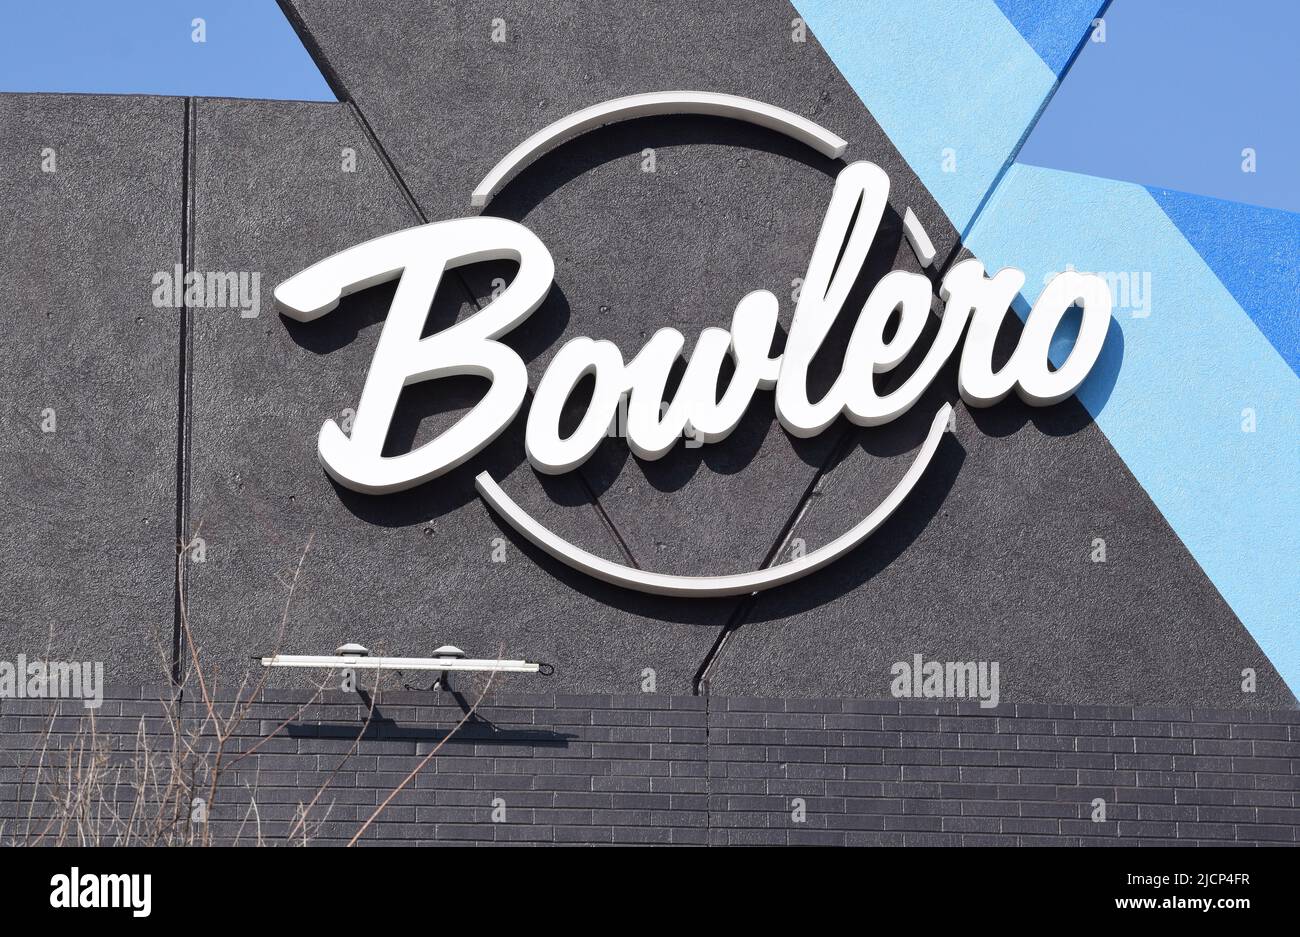 Close up of a Bowlero bowling alley sign Stock Photo